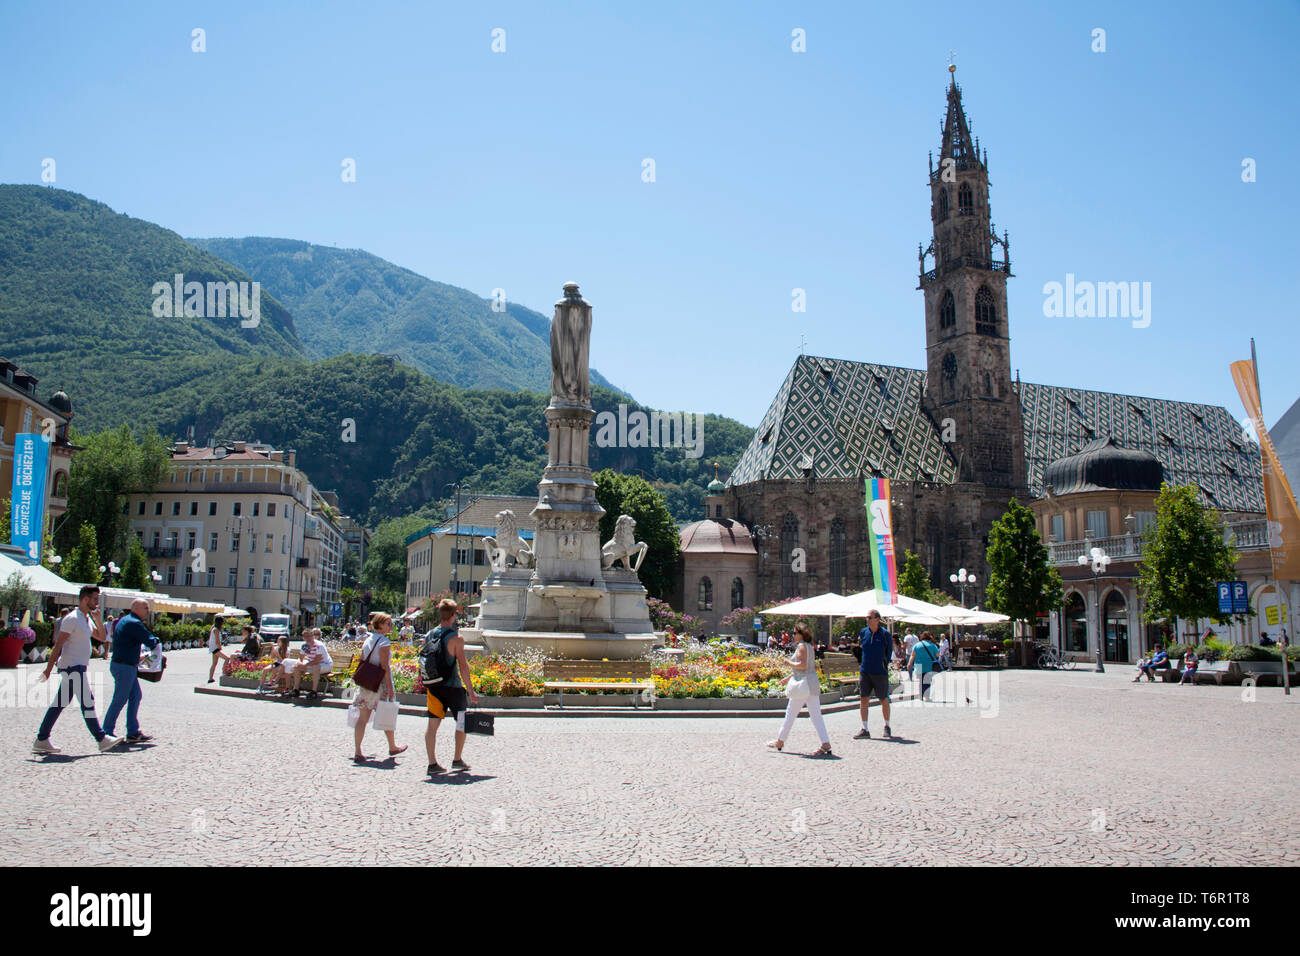 The Duomo of Dom Maria Himmelfahrt and the Piazza Walther von de Vogelweide Bolzano Dolomites South Tyrol Italy Stock Photo